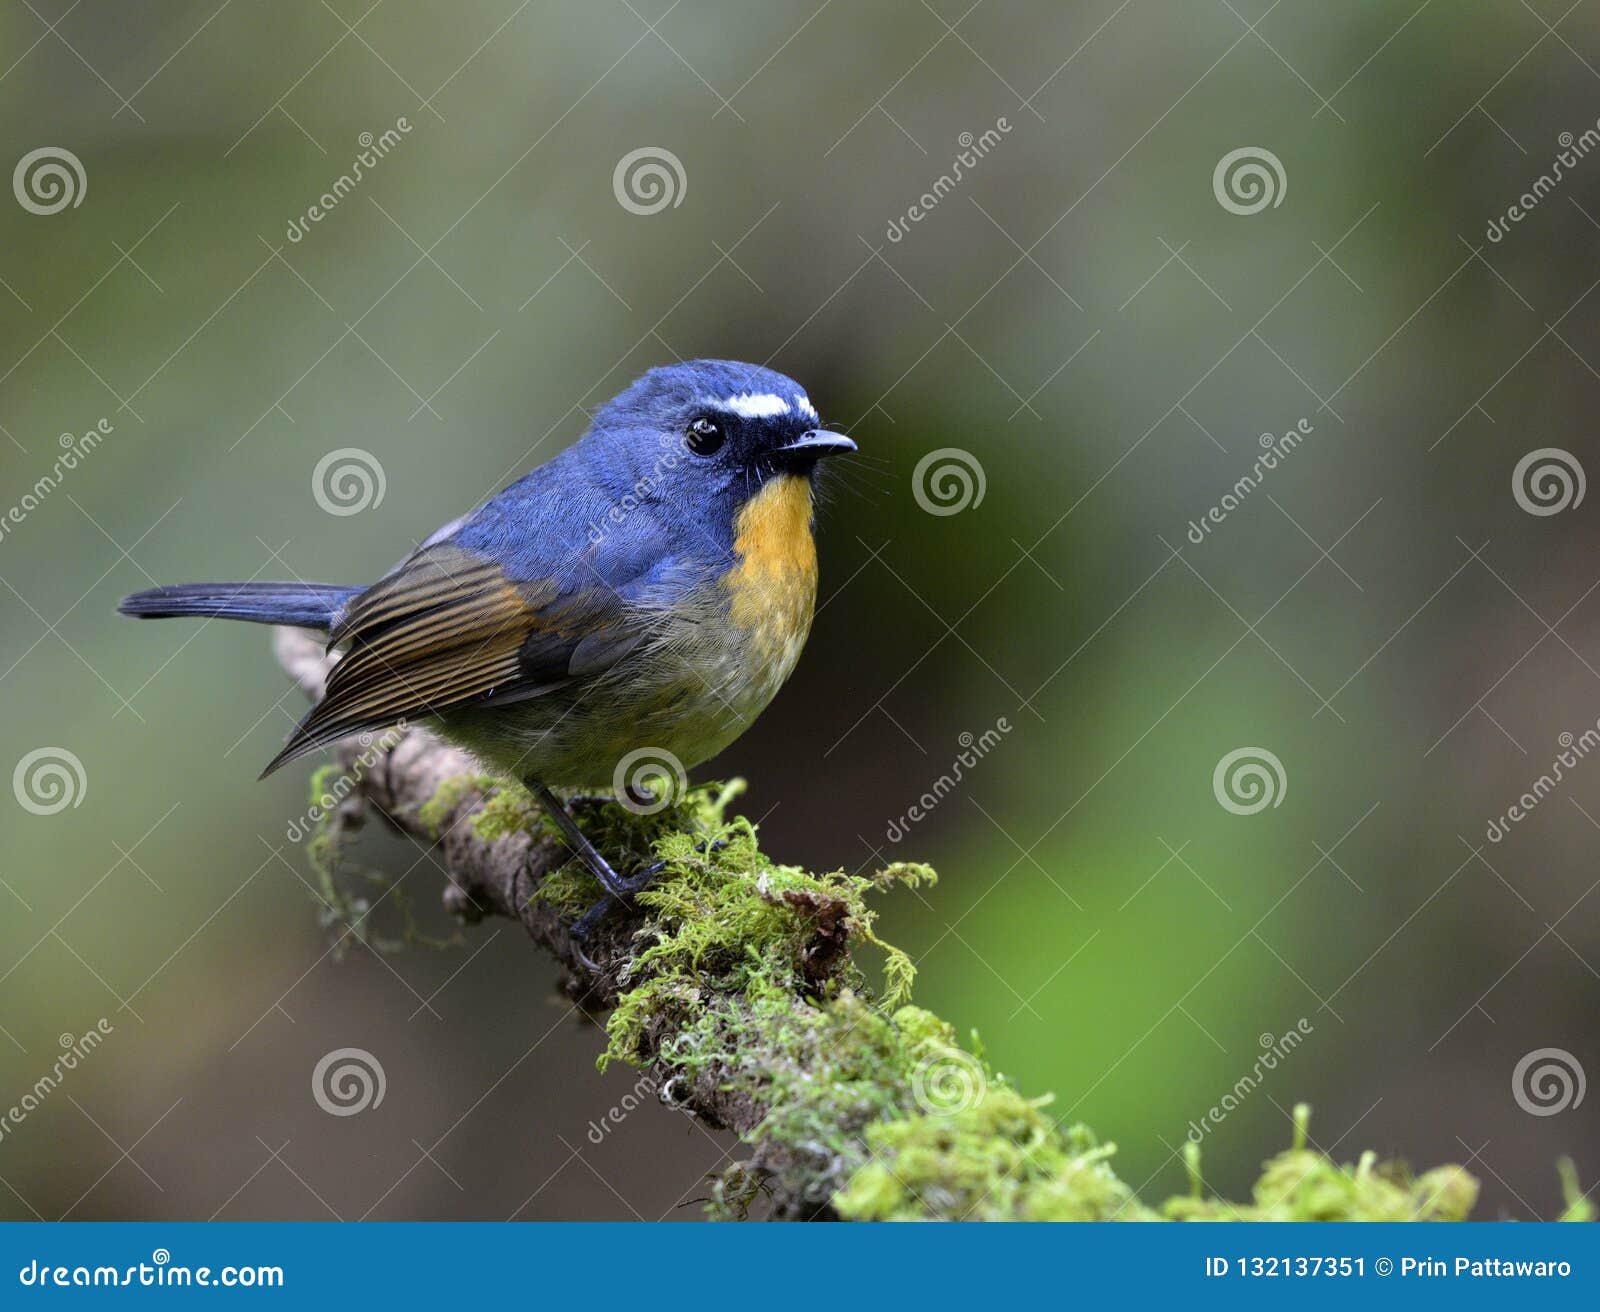 beautiful blue bird with orange chest and white brows perching o